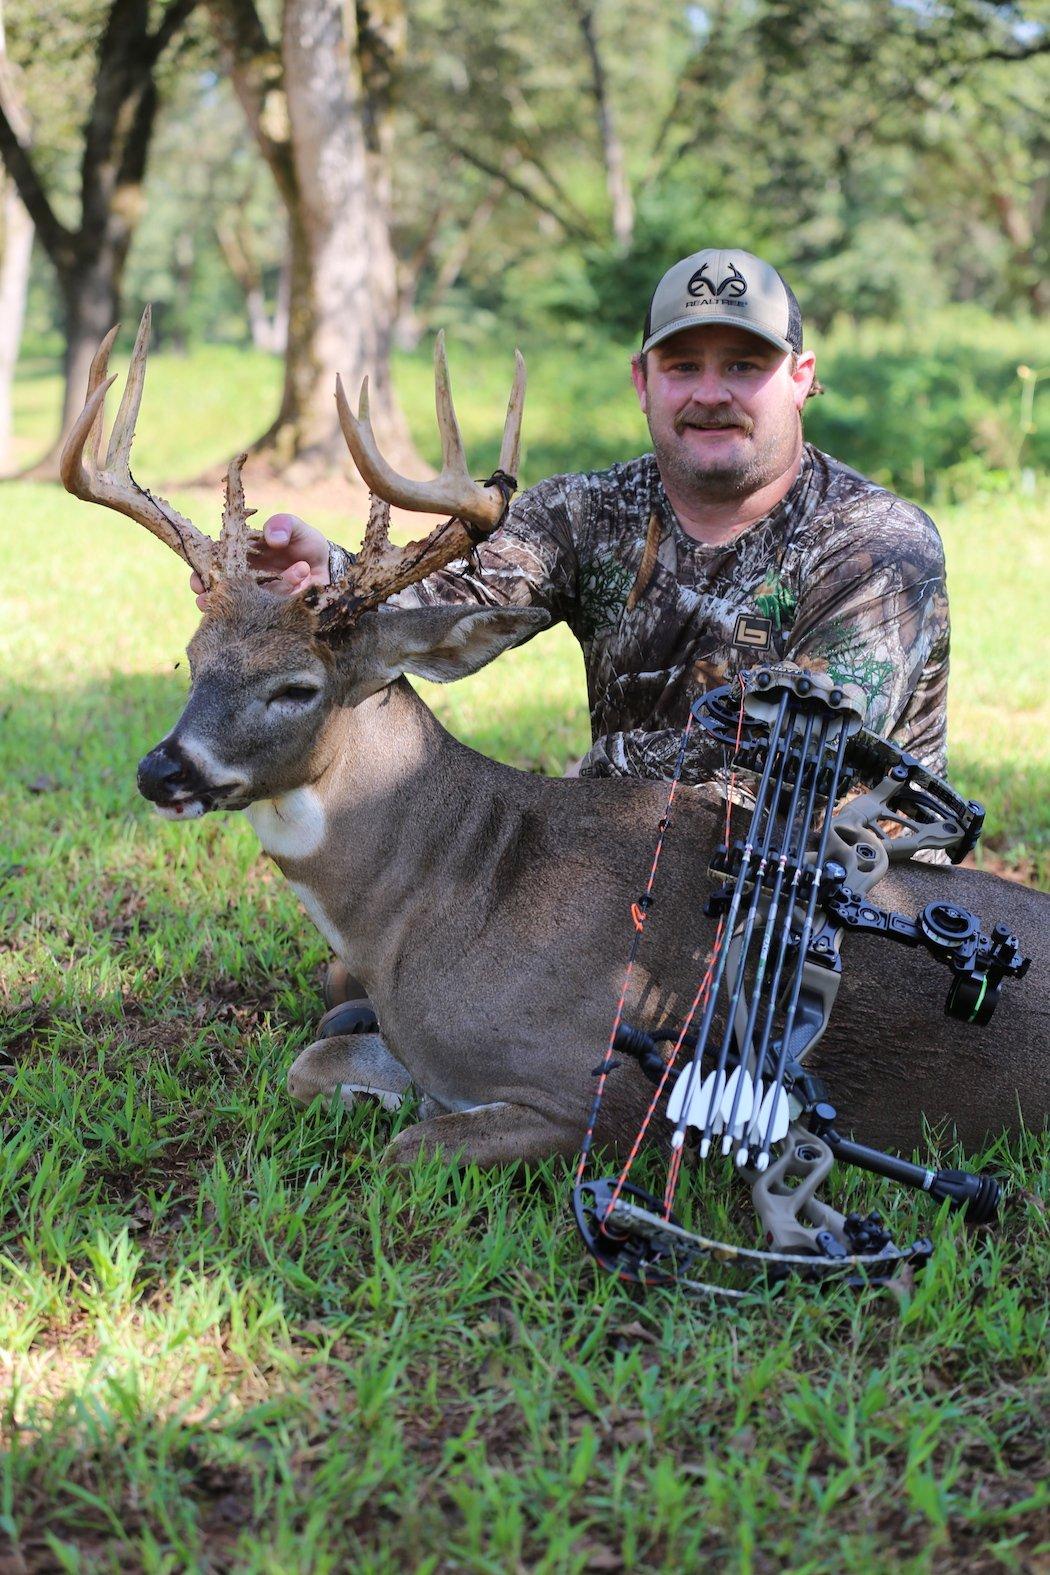 Michael Pitts' Pig of a Whitetail